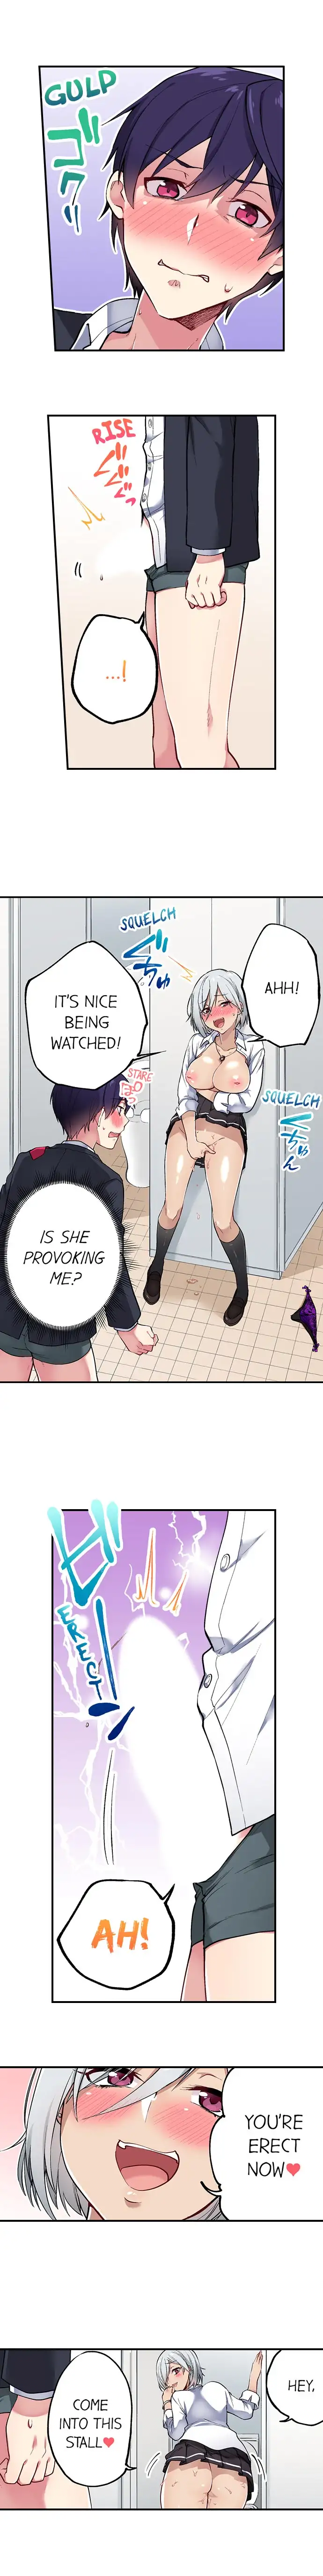 Committee Chairman, Didn’t You Just Masturbate In the Bathroom? I Can See the Number of Times People Orgasm - Chapter 44 Page 8